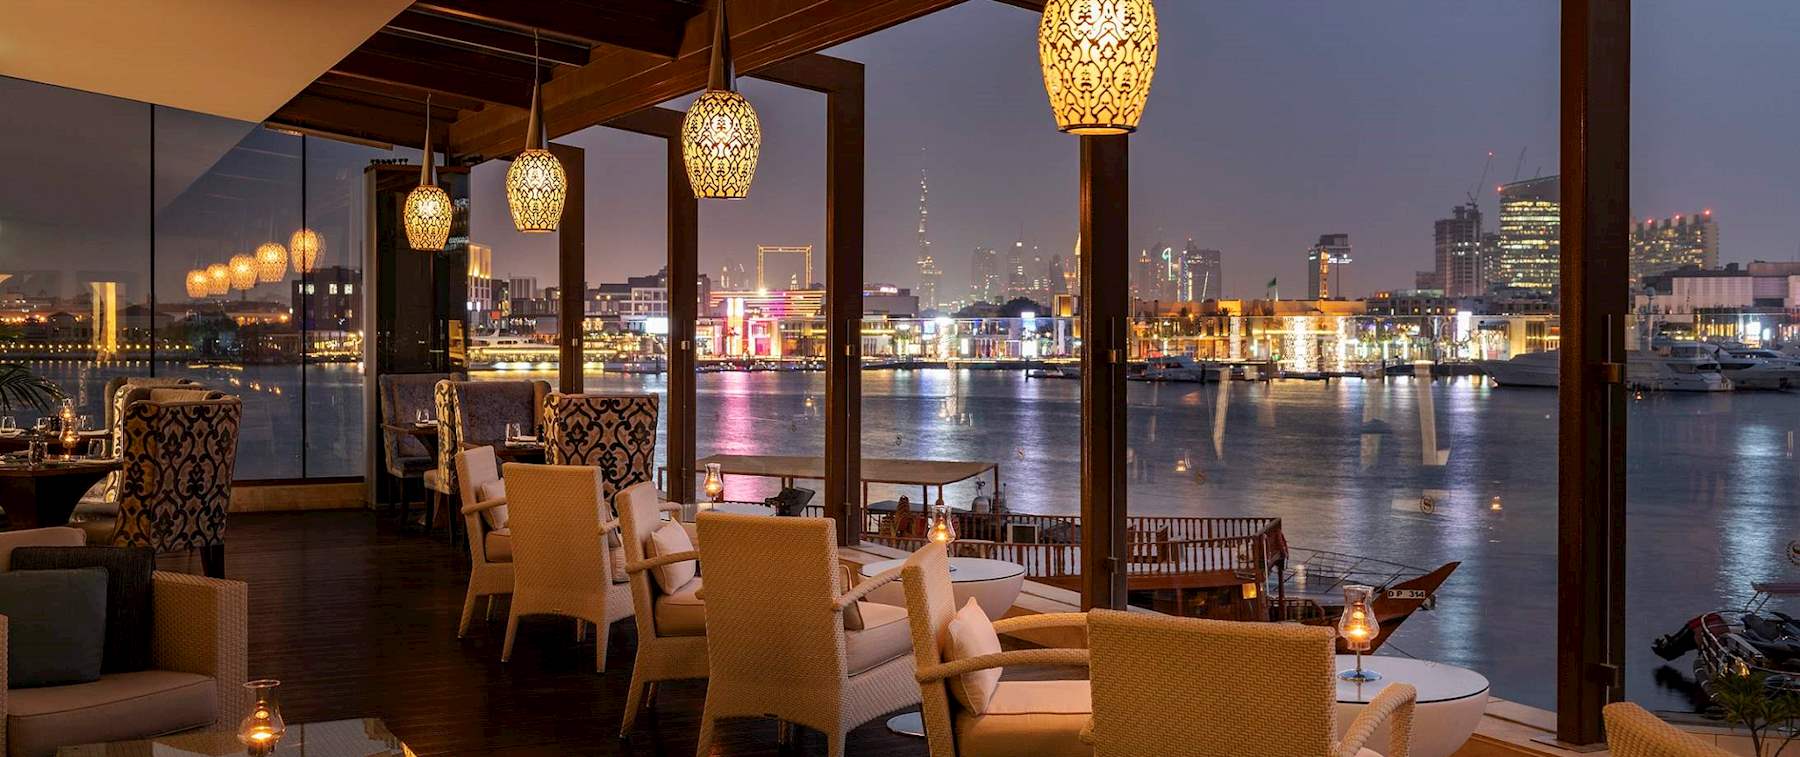 Sunset with delicious drinks during happy hour Vivaldi Dubai